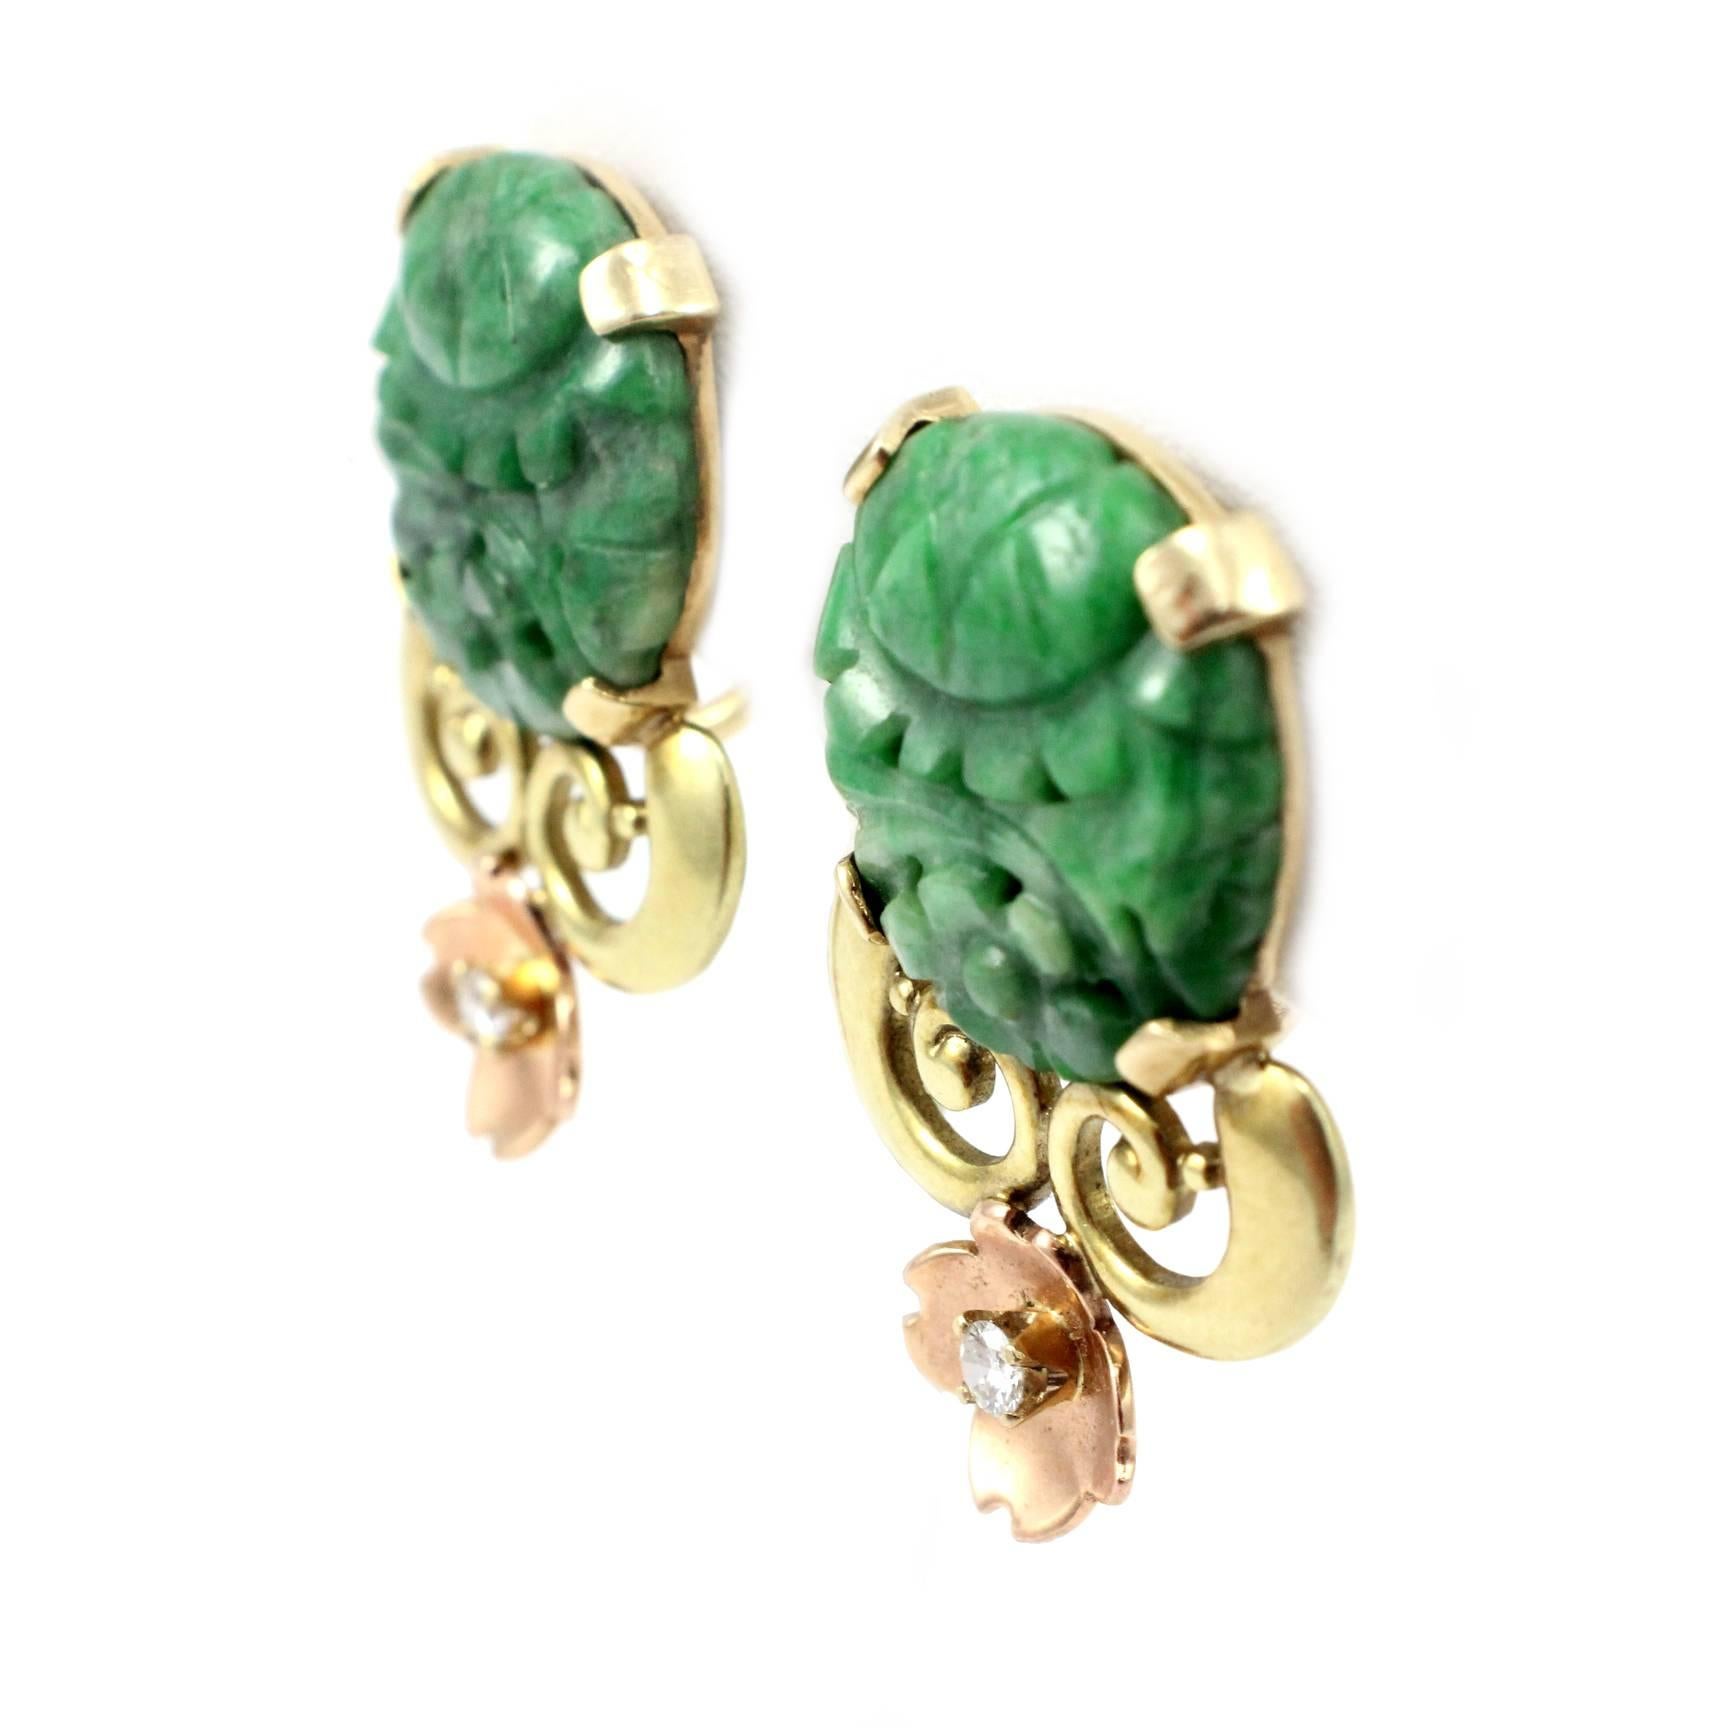 Vintage Signed Tiffany & Co. Rare Retro Hand Carved Jade Diamond Gold Earrings  In Excellent Condition For Sale In Scottsdale, AZ